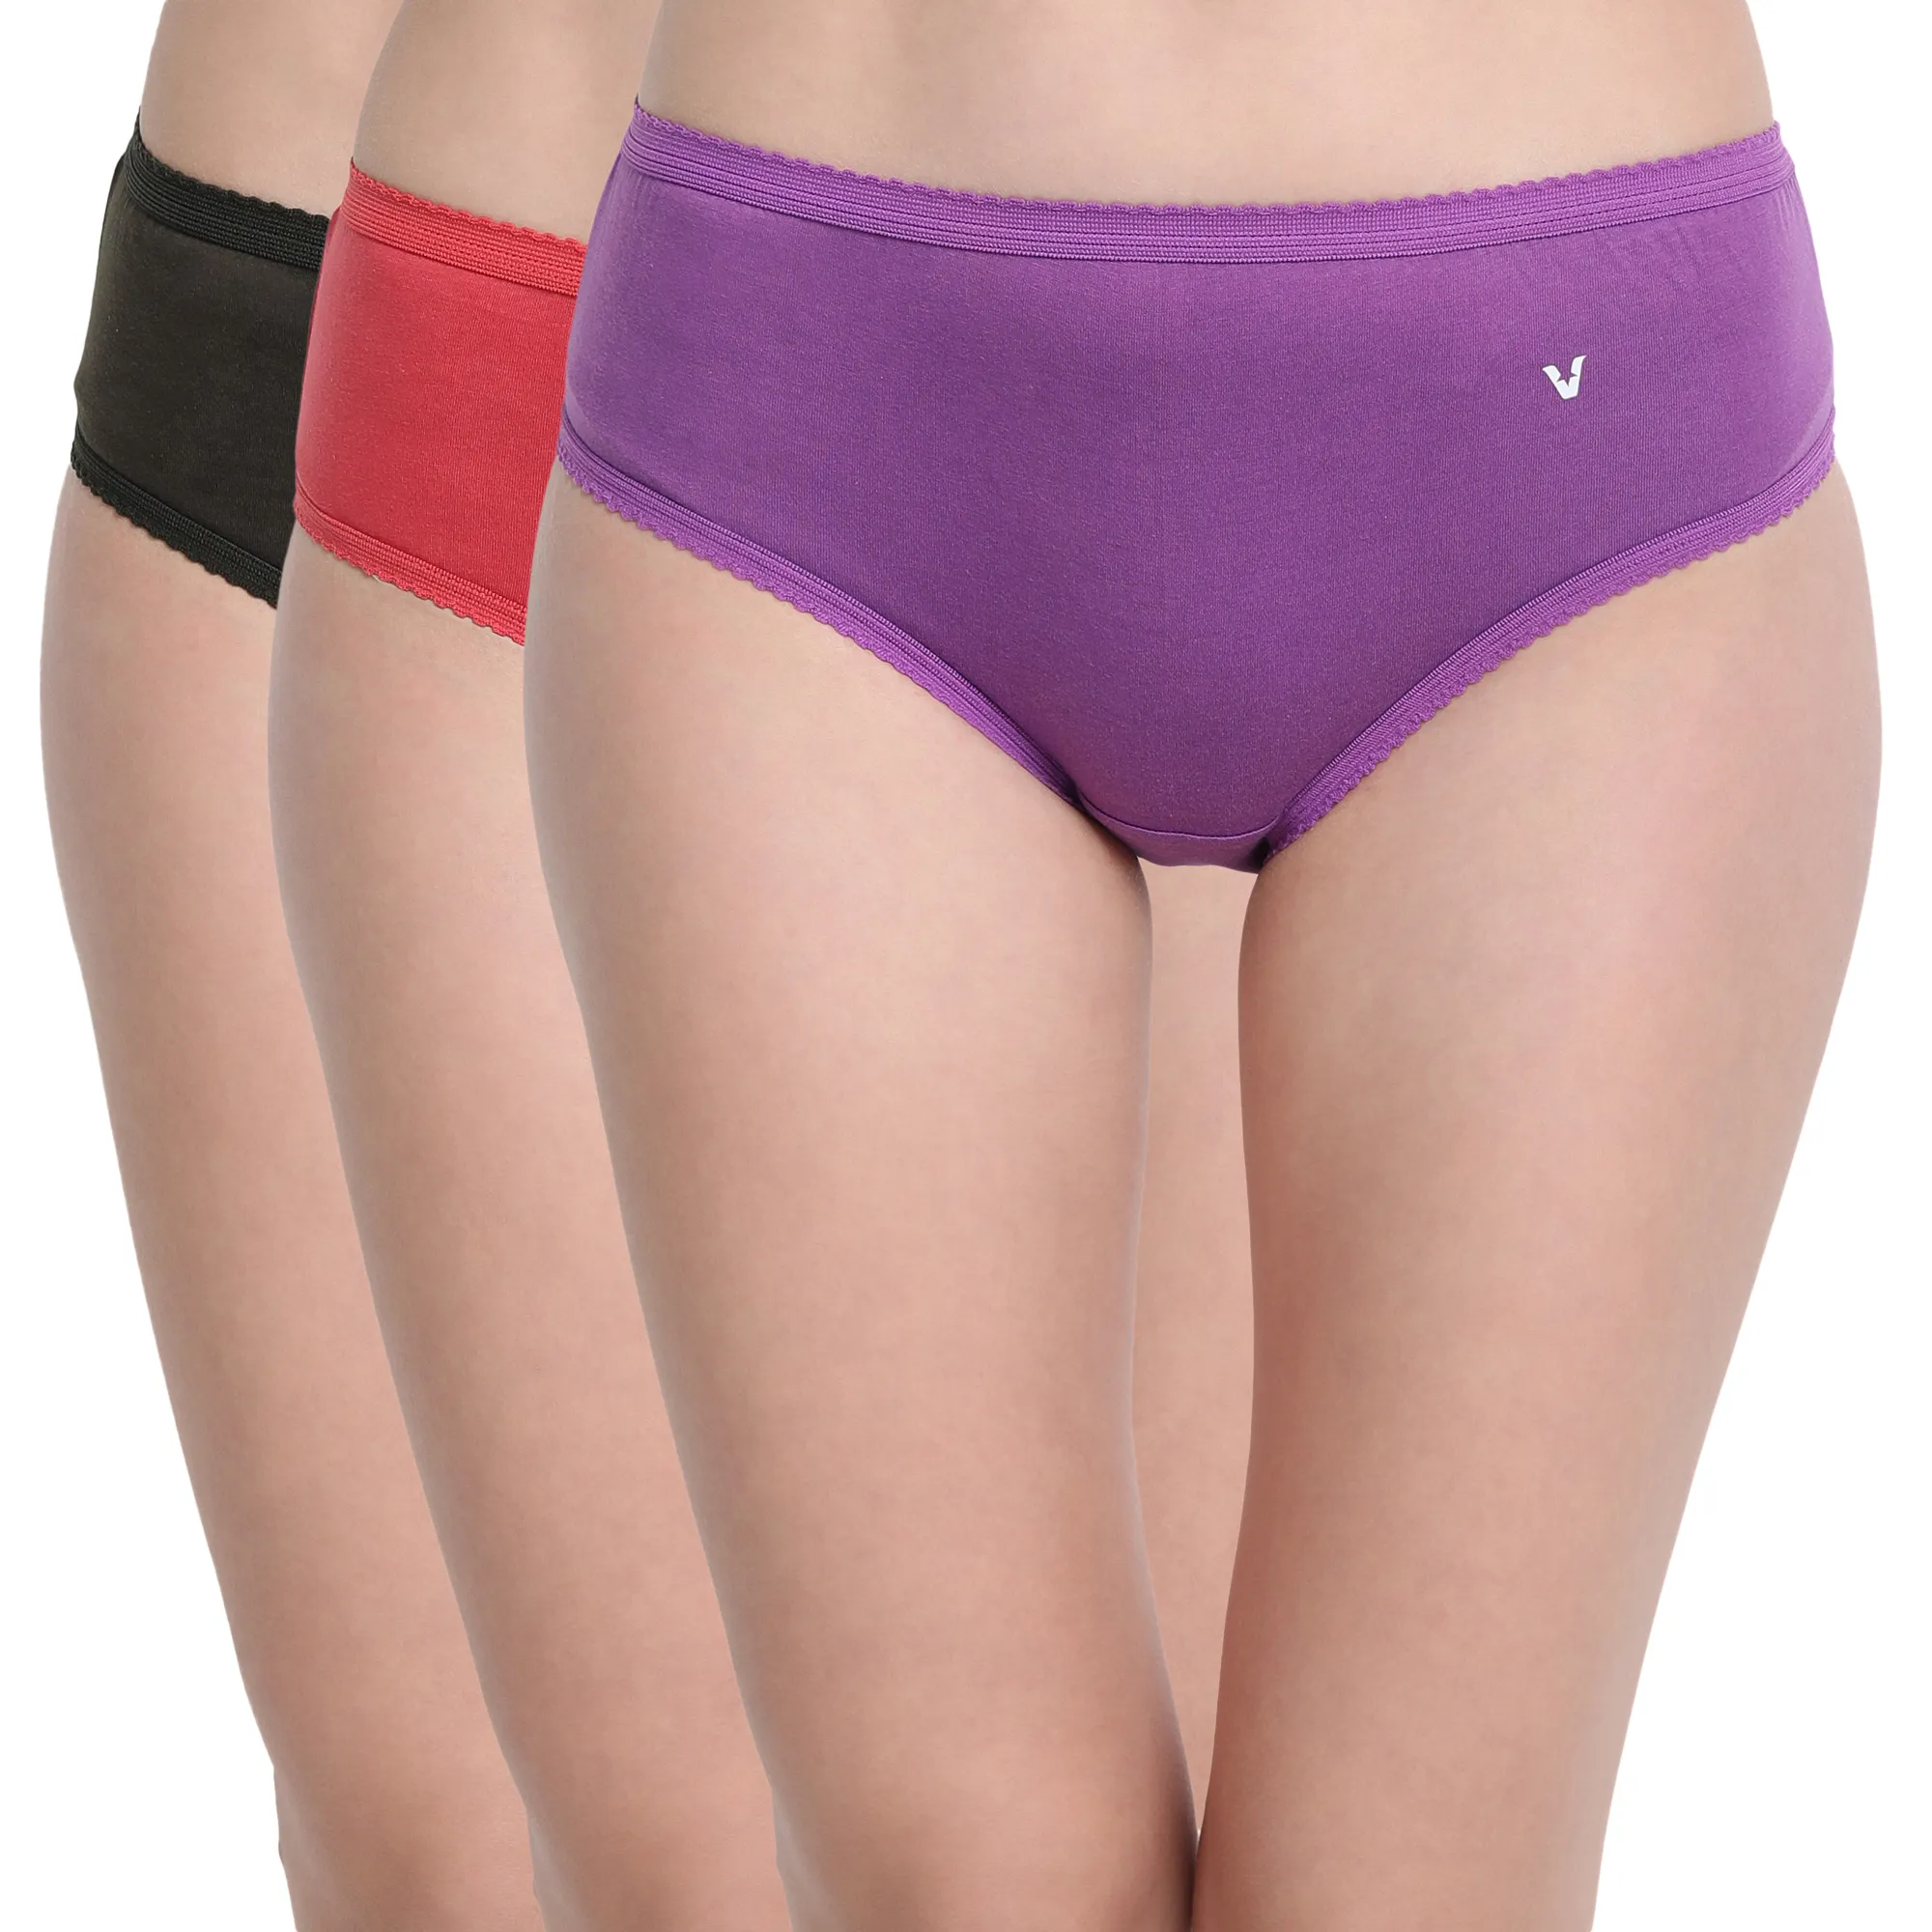 High waist panty with ultra soft exposed elastic waistband - Pack of 3, Buy Mens & Kids Innerwear